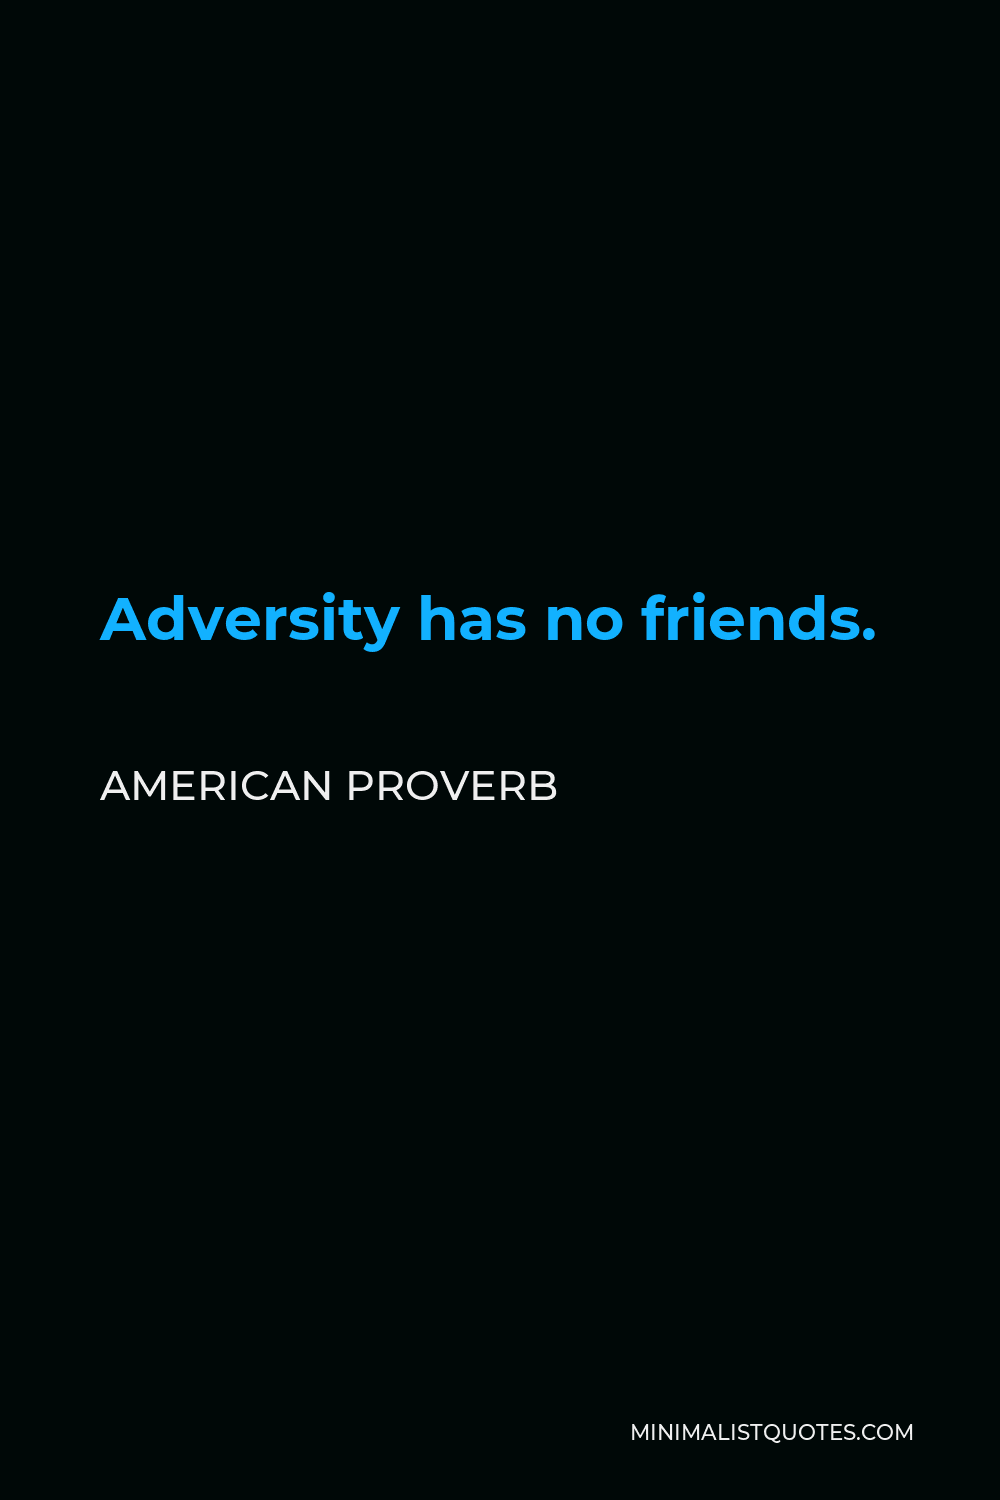 American Proverb Quote - Adversity has no friends.